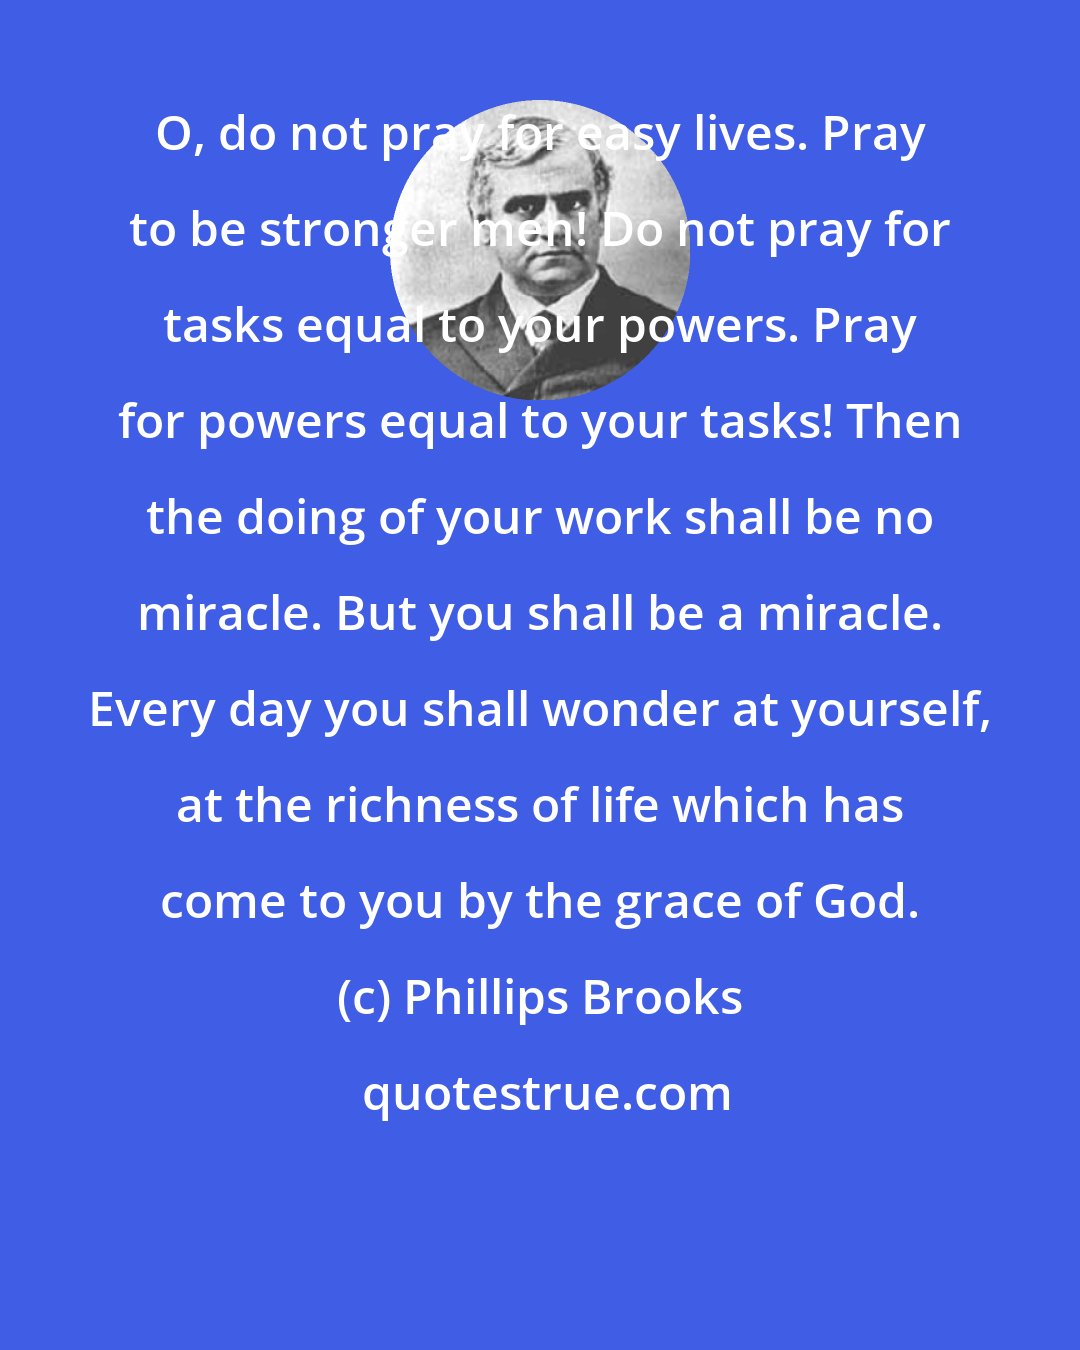 Phillips Brooks: O, do not pray for easy lives. Pray to be stronger men! Do not pray for tasks equal to your powers. Pray for powers equal to your tasks! Then the doing of your work shall be no miracle. But you shall be a miracle. Every day you shall wonder at yourself, at the richness of life which has come to you by the grace of God.